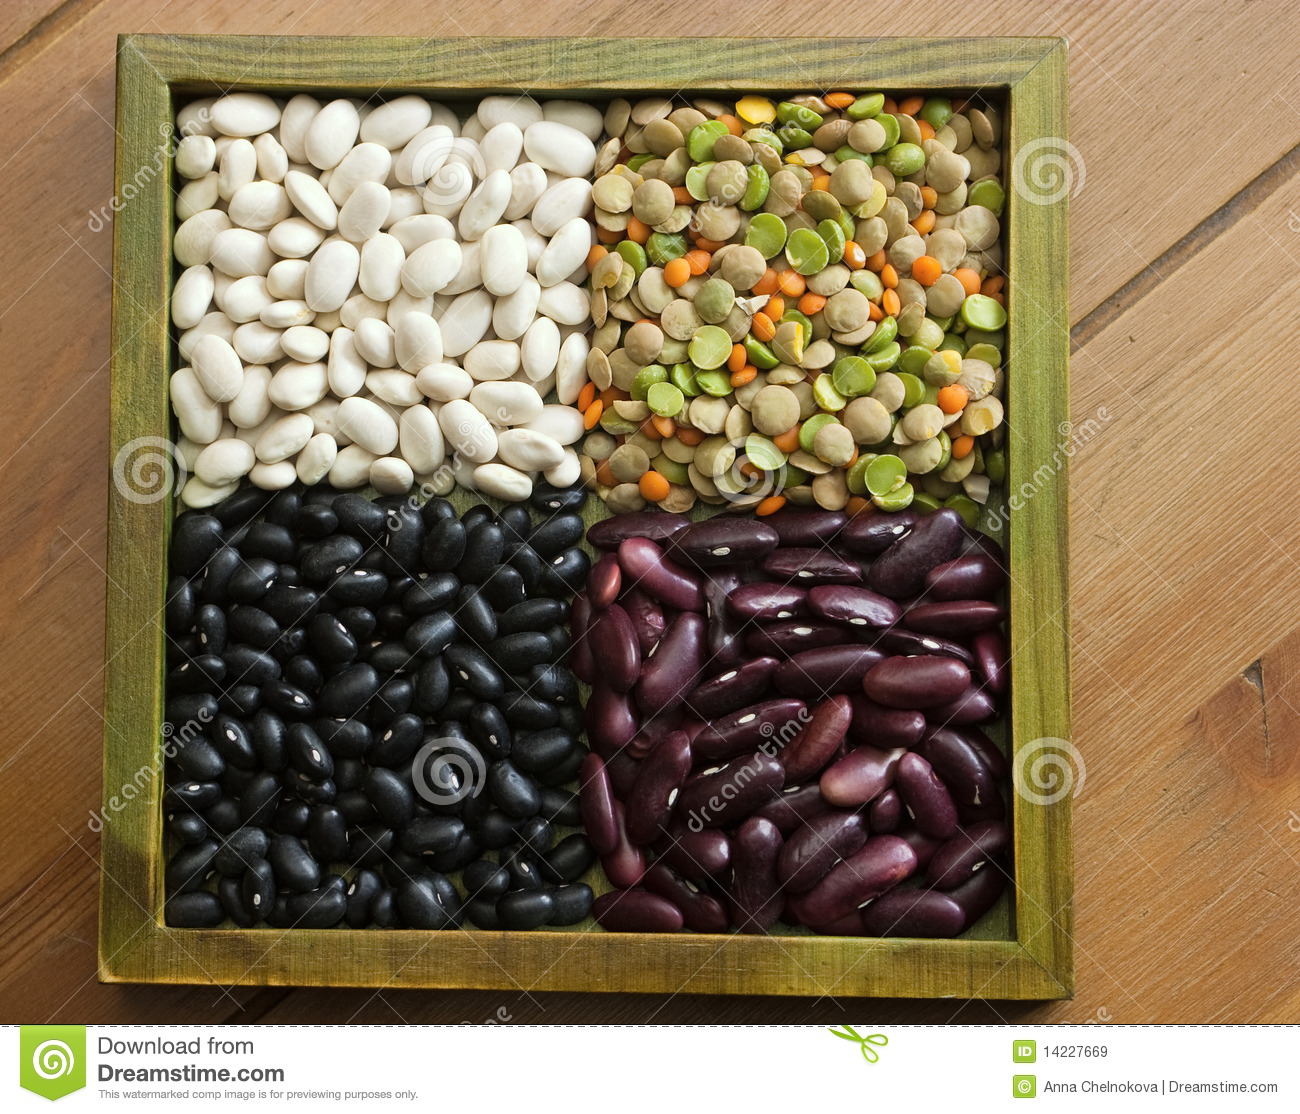 Mixed Dried Beans Royalty Free Stock Images   Image  14227669